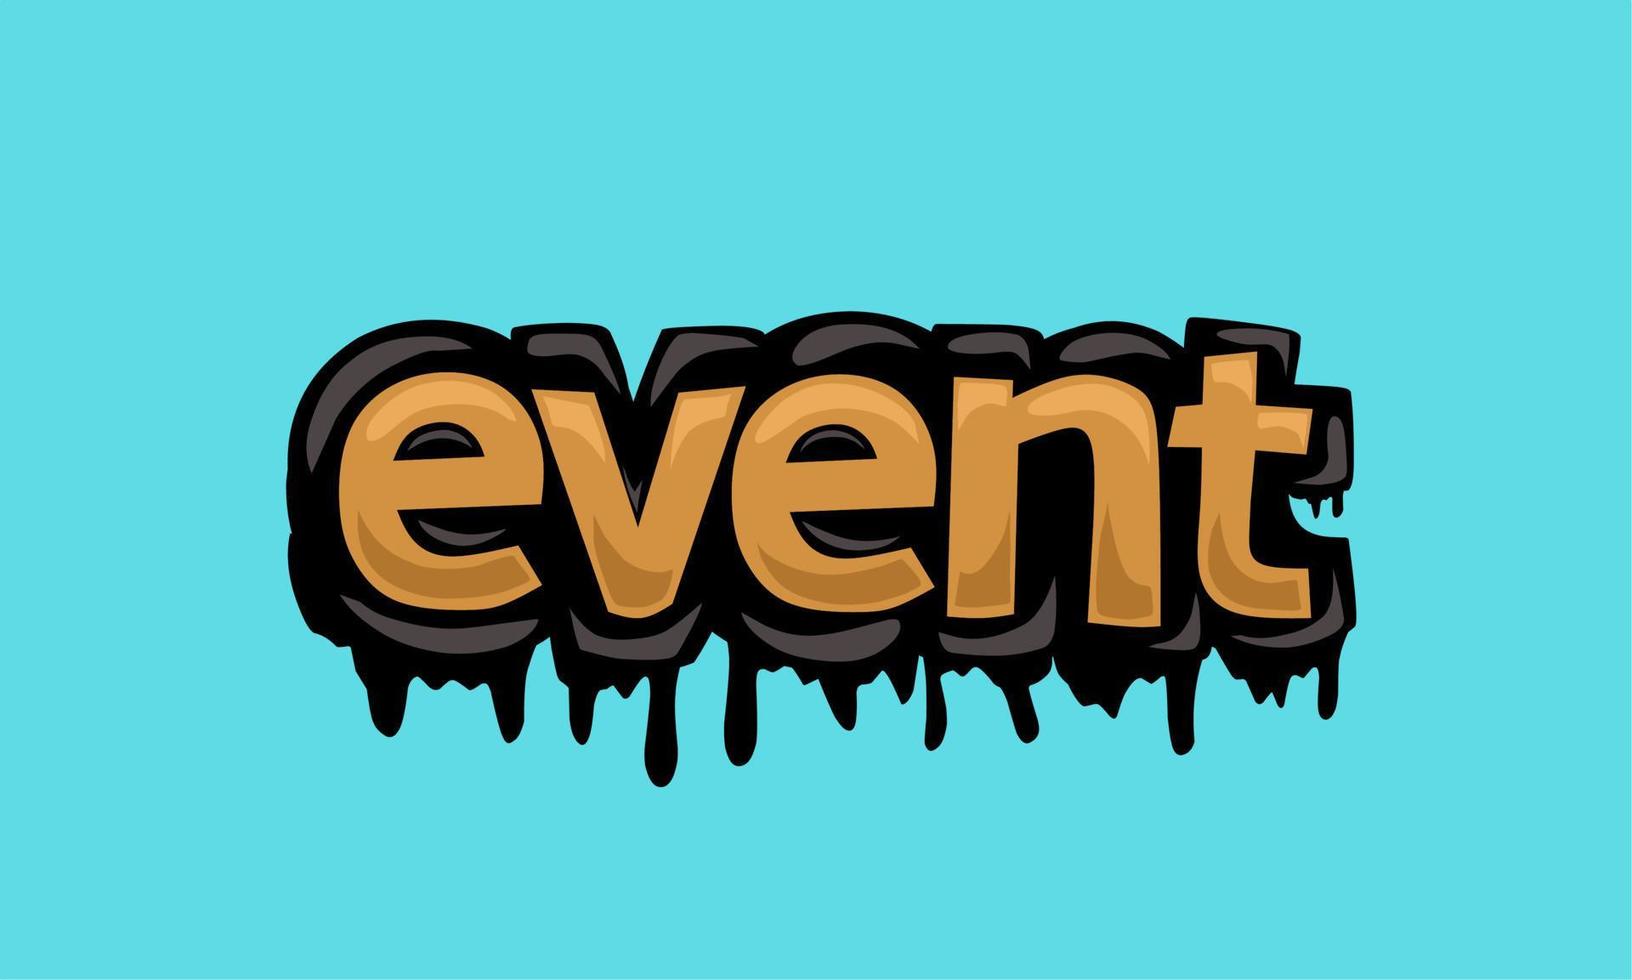 EVENT writing vector design on blue background